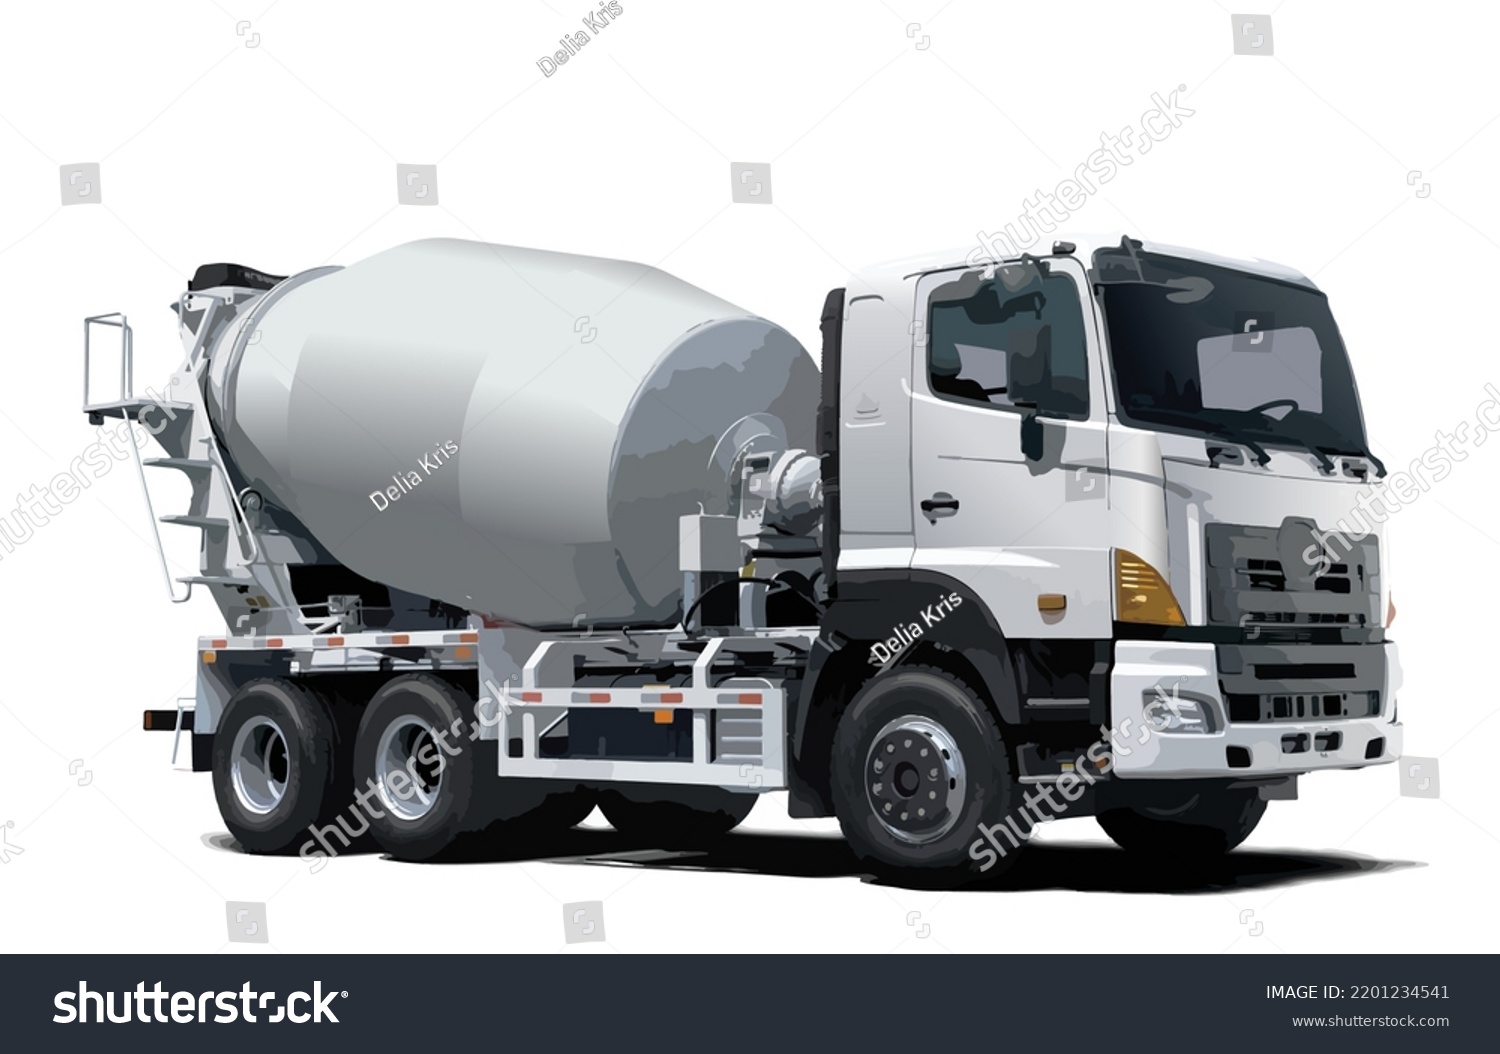 SVG of Concrete cement mix delivery work transport heavy cargo engine machine car mixer vehicle truck isolated on white background. Construction illustration modern vehicle vector template, easy editing svg